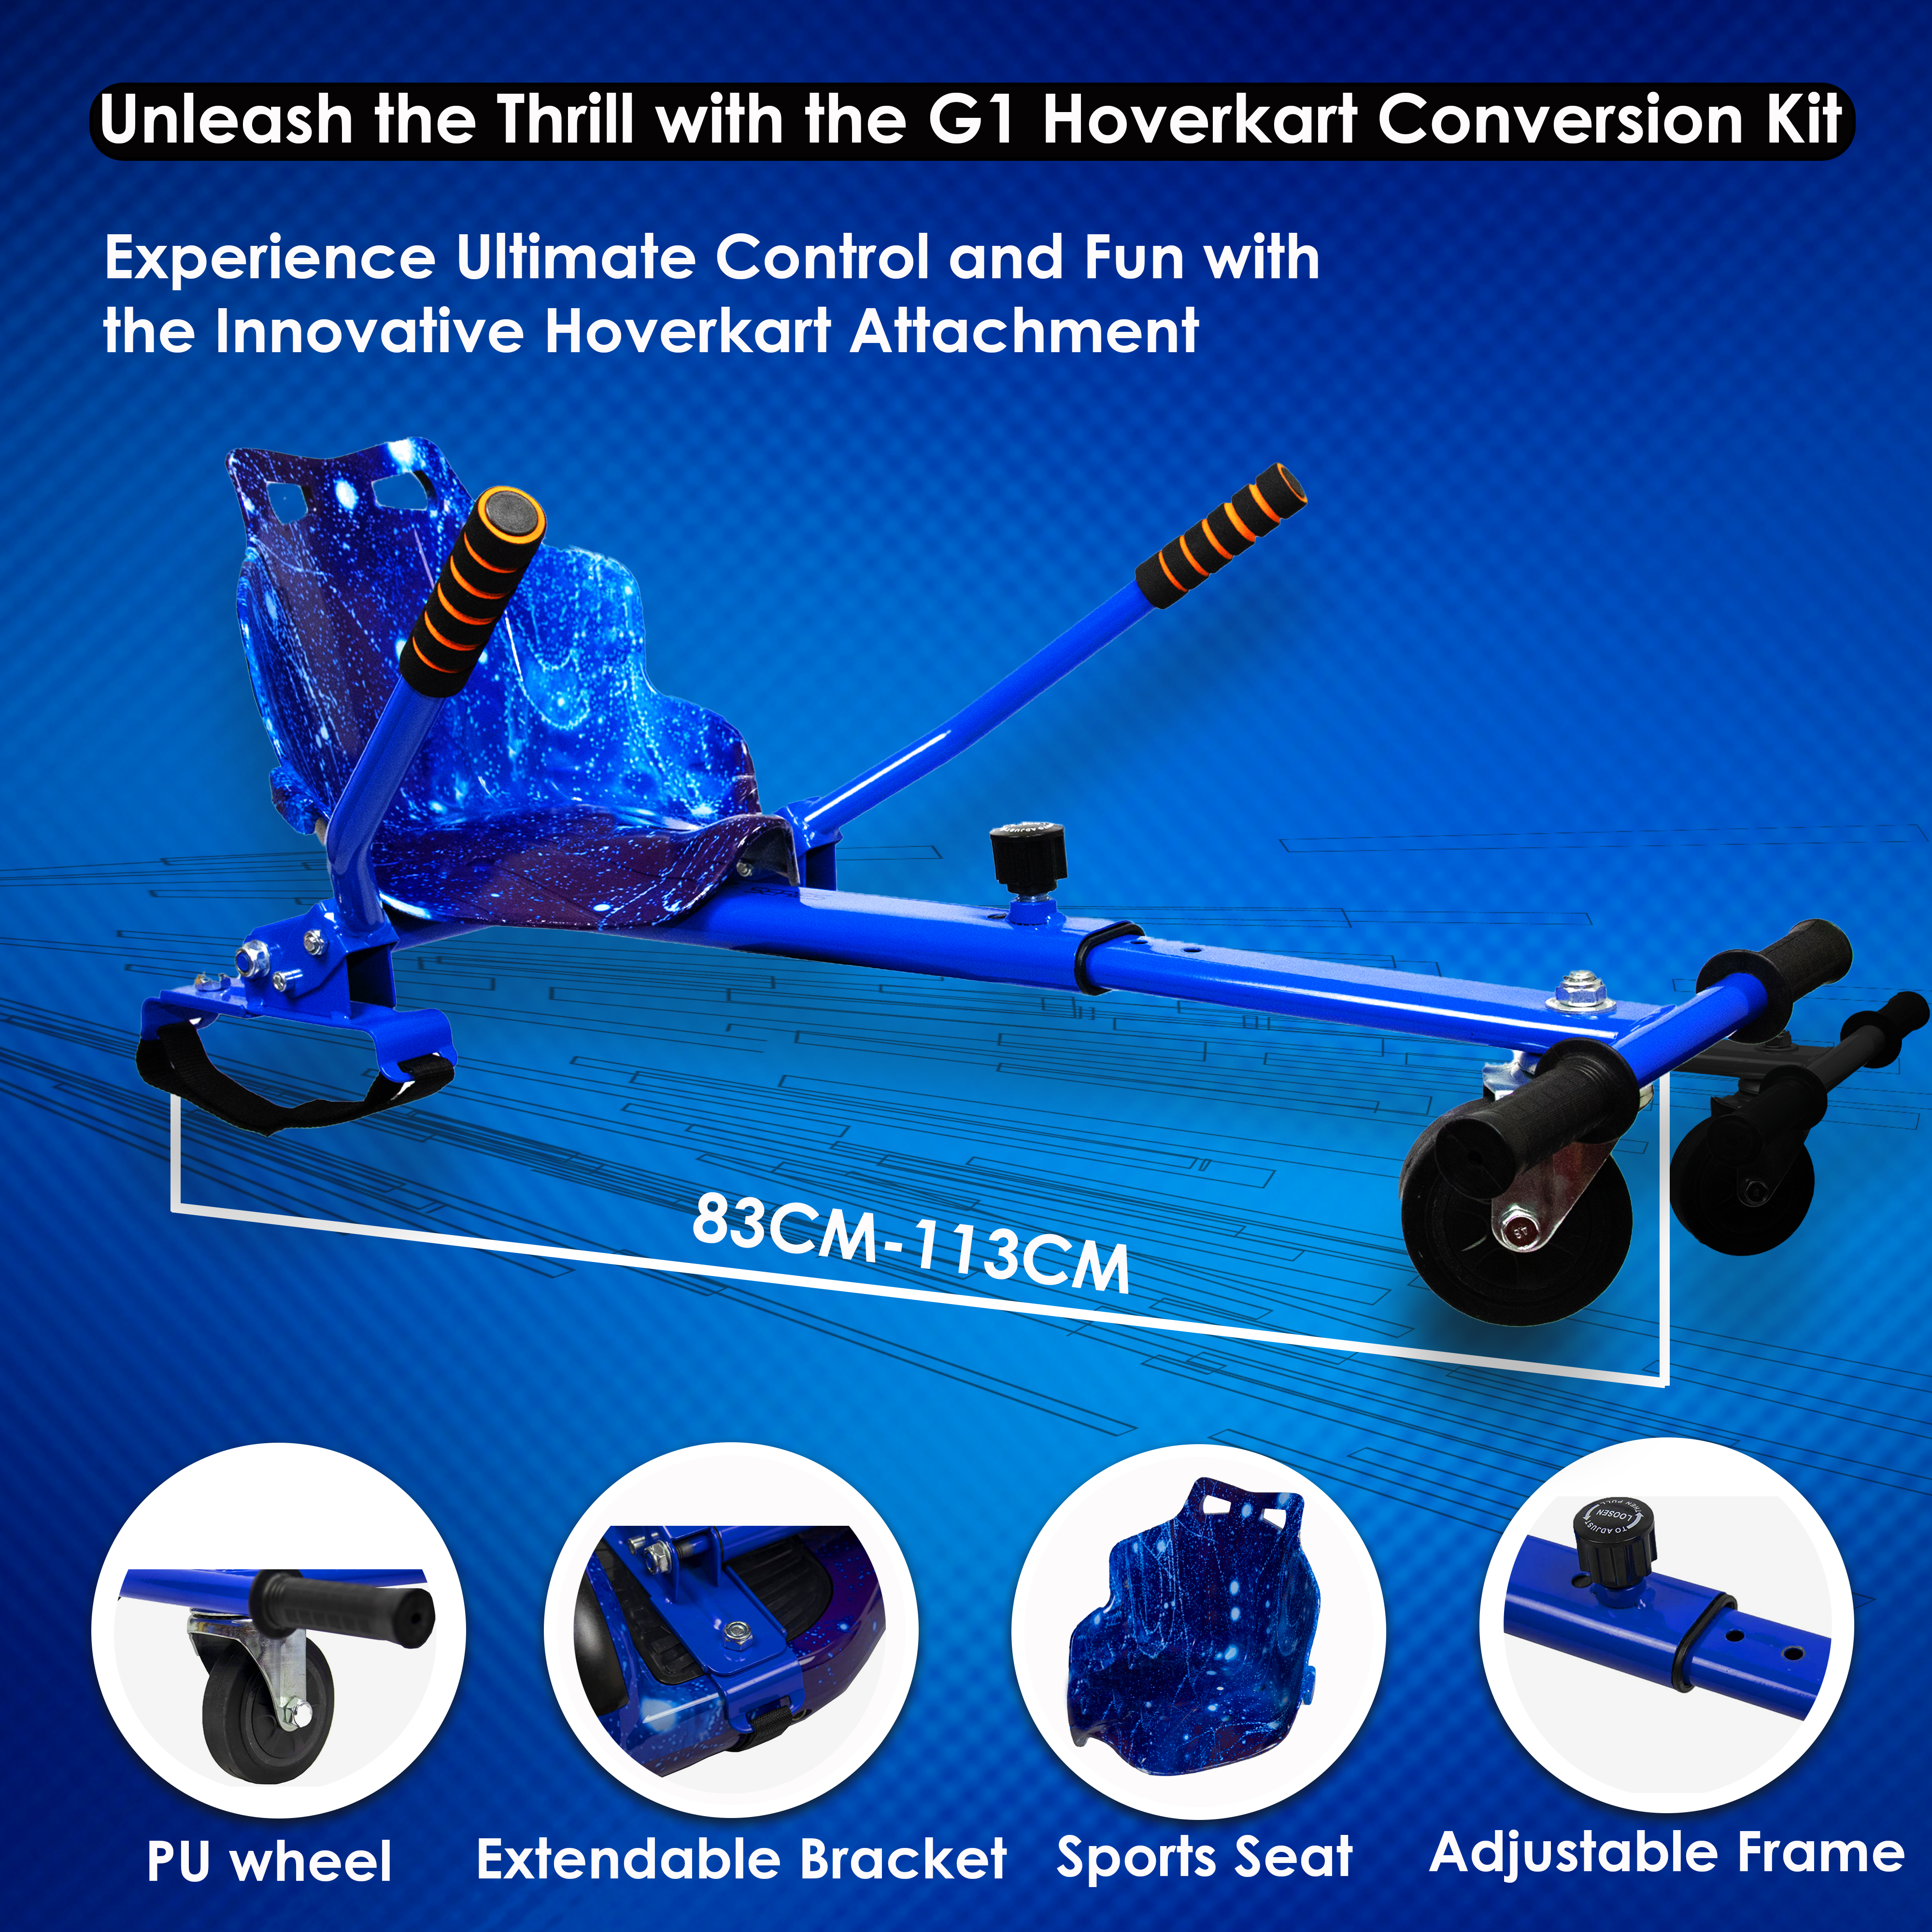 Explore the thrill with the G1 hoverkart conversion kit, detailing the extendable bracket and sports seat adjustments.